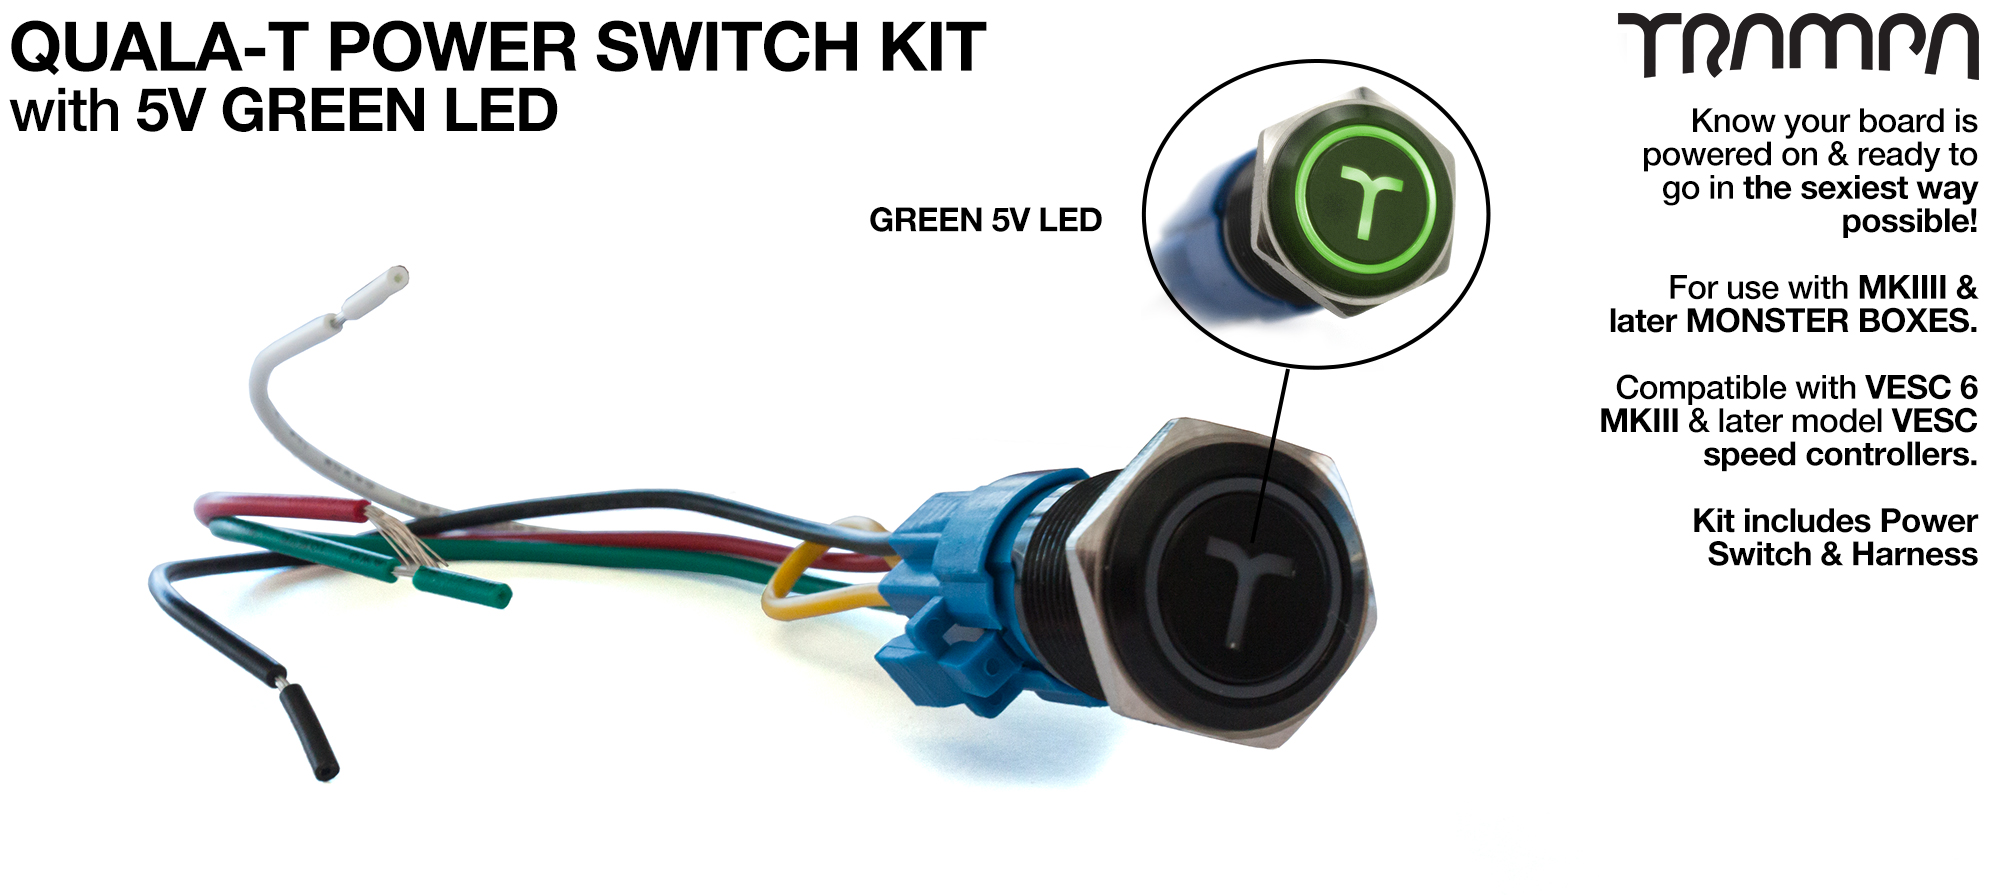 GREEN LED QUALA-T Power Switch Kit with 16mm Fixing Nut & Cable Harness 